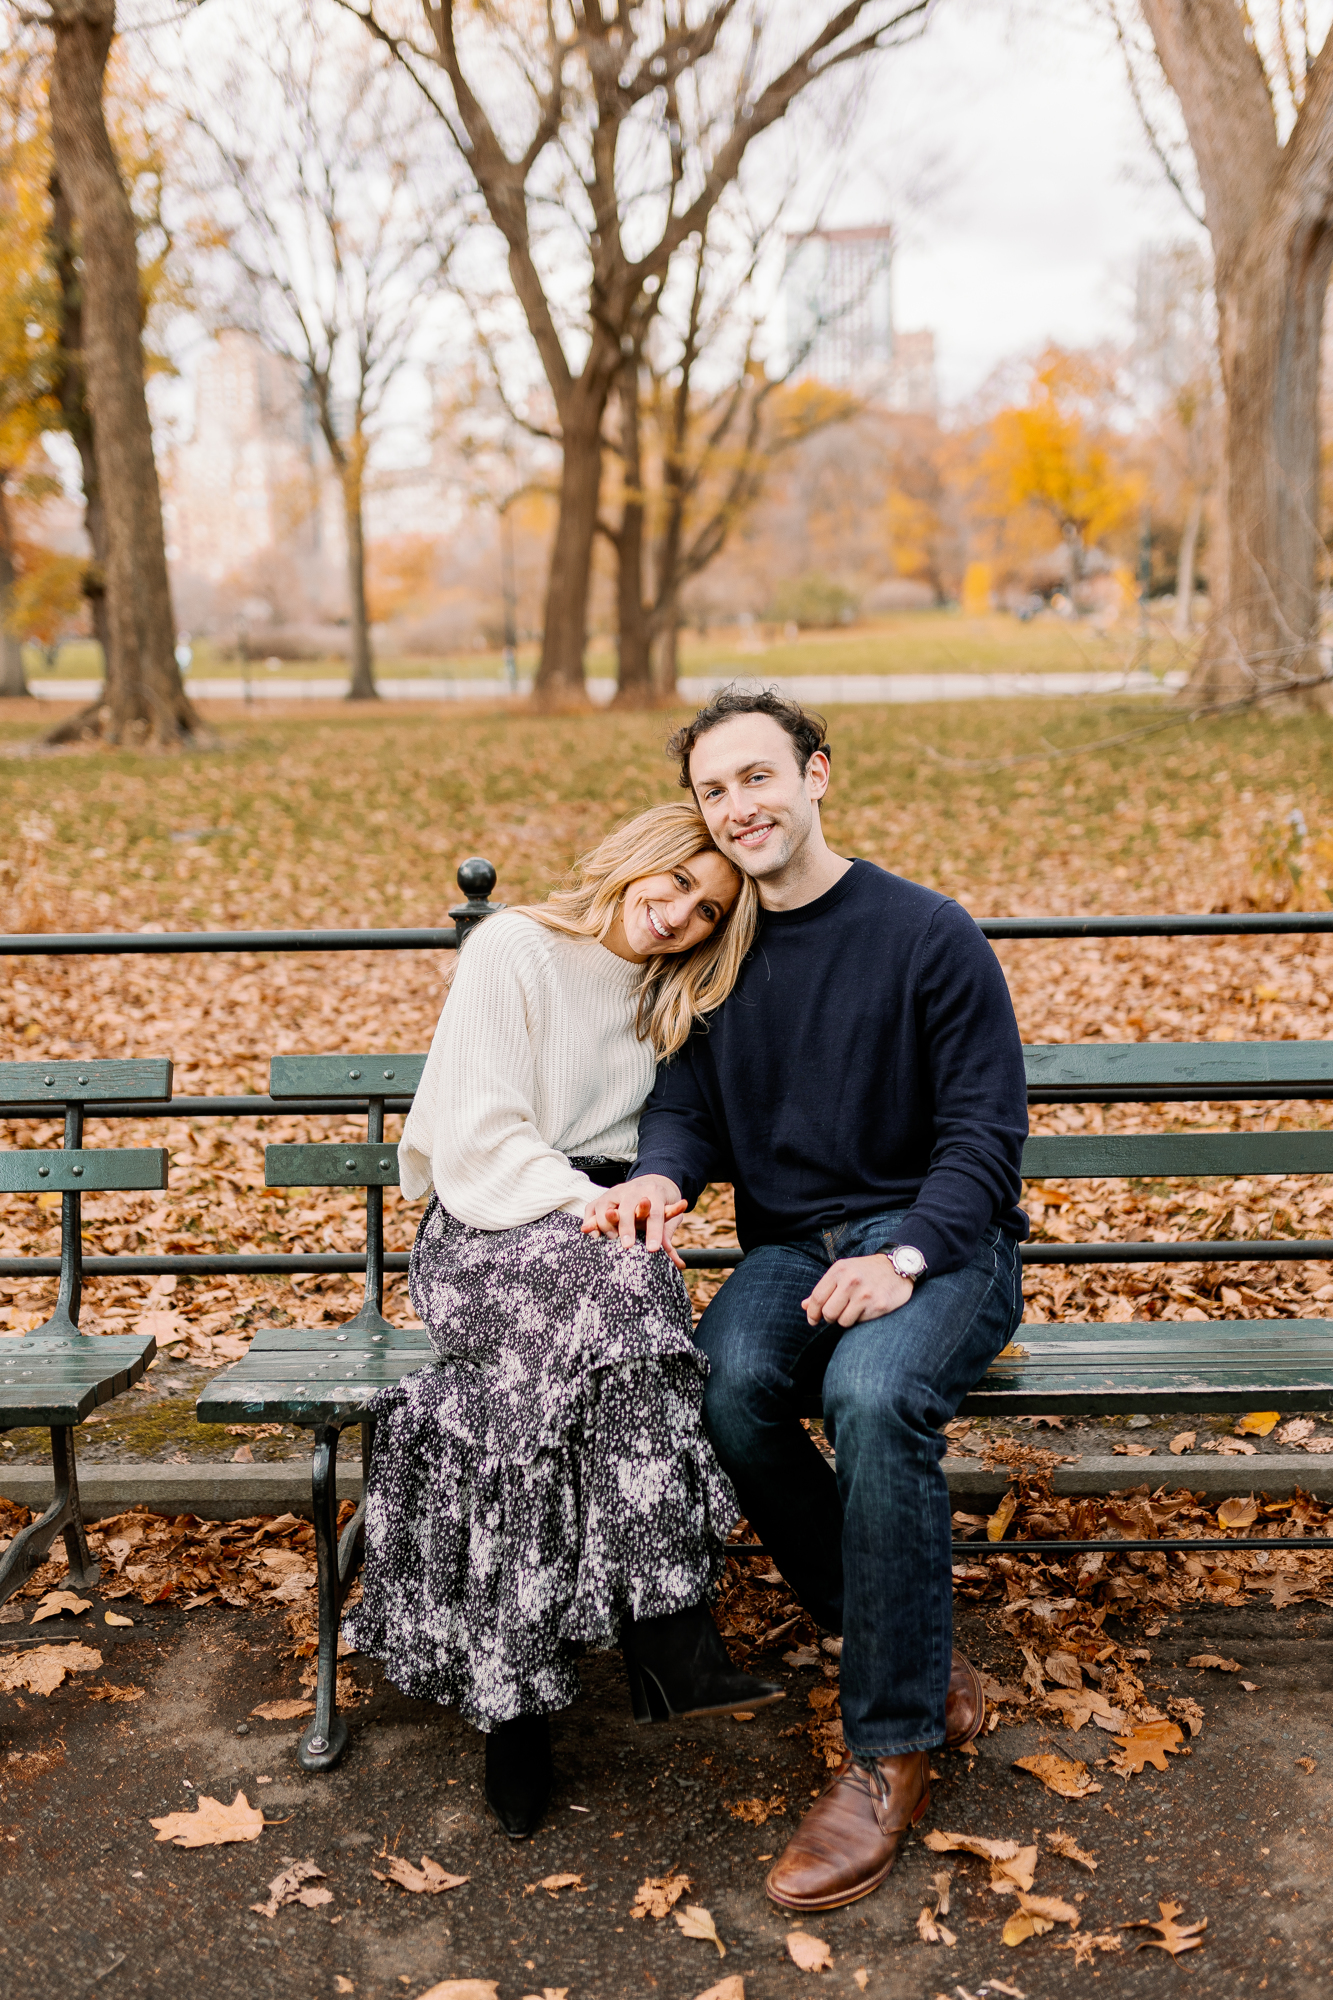 Fall engagement photos in Central Park